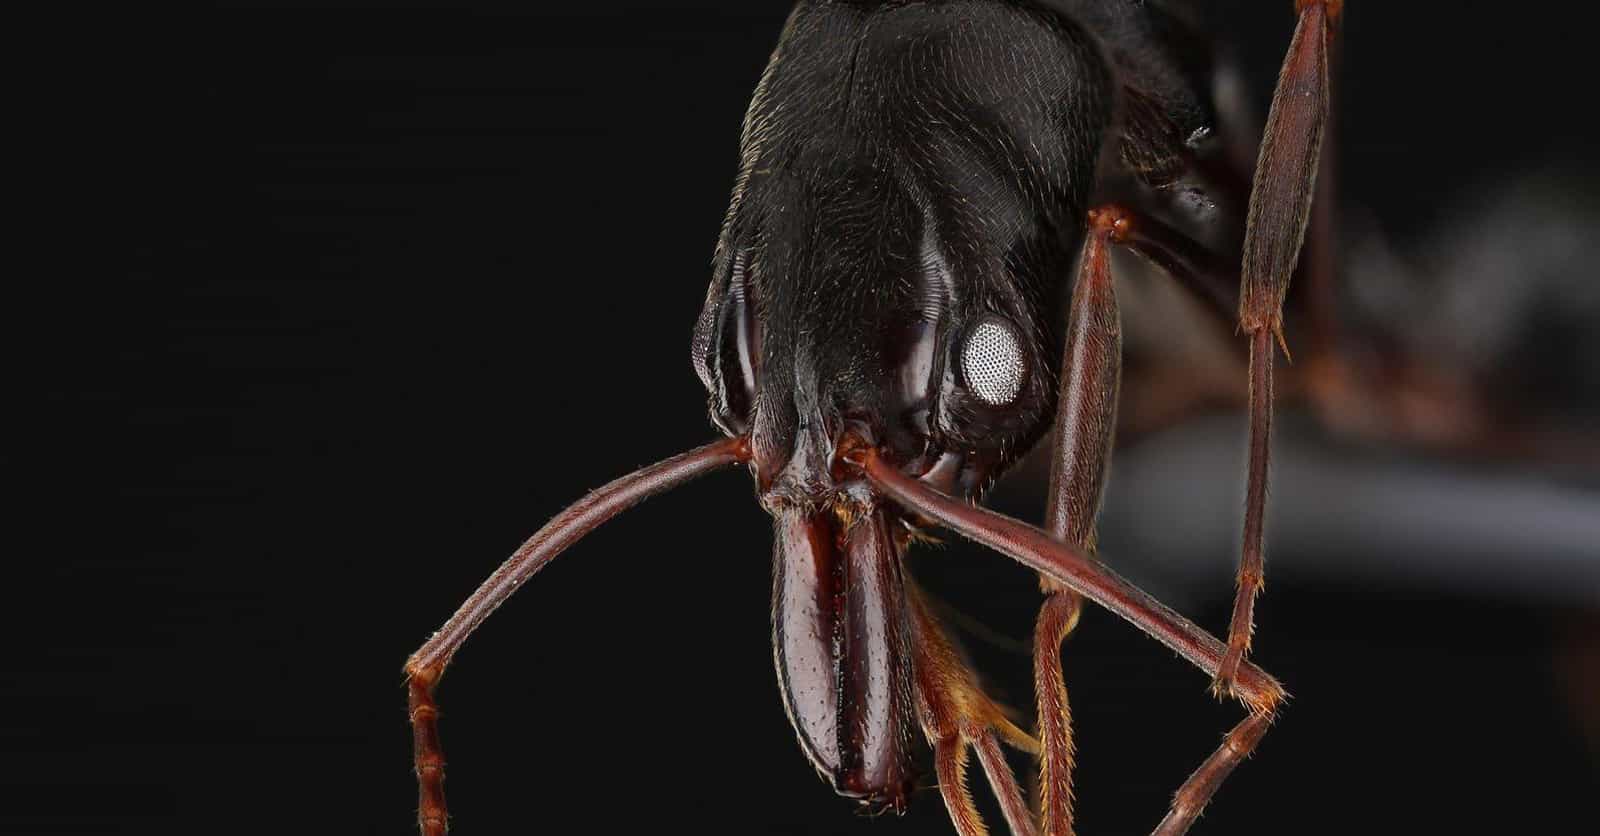 Creepy Facts About Bugs Nobody Really Wants To Think About